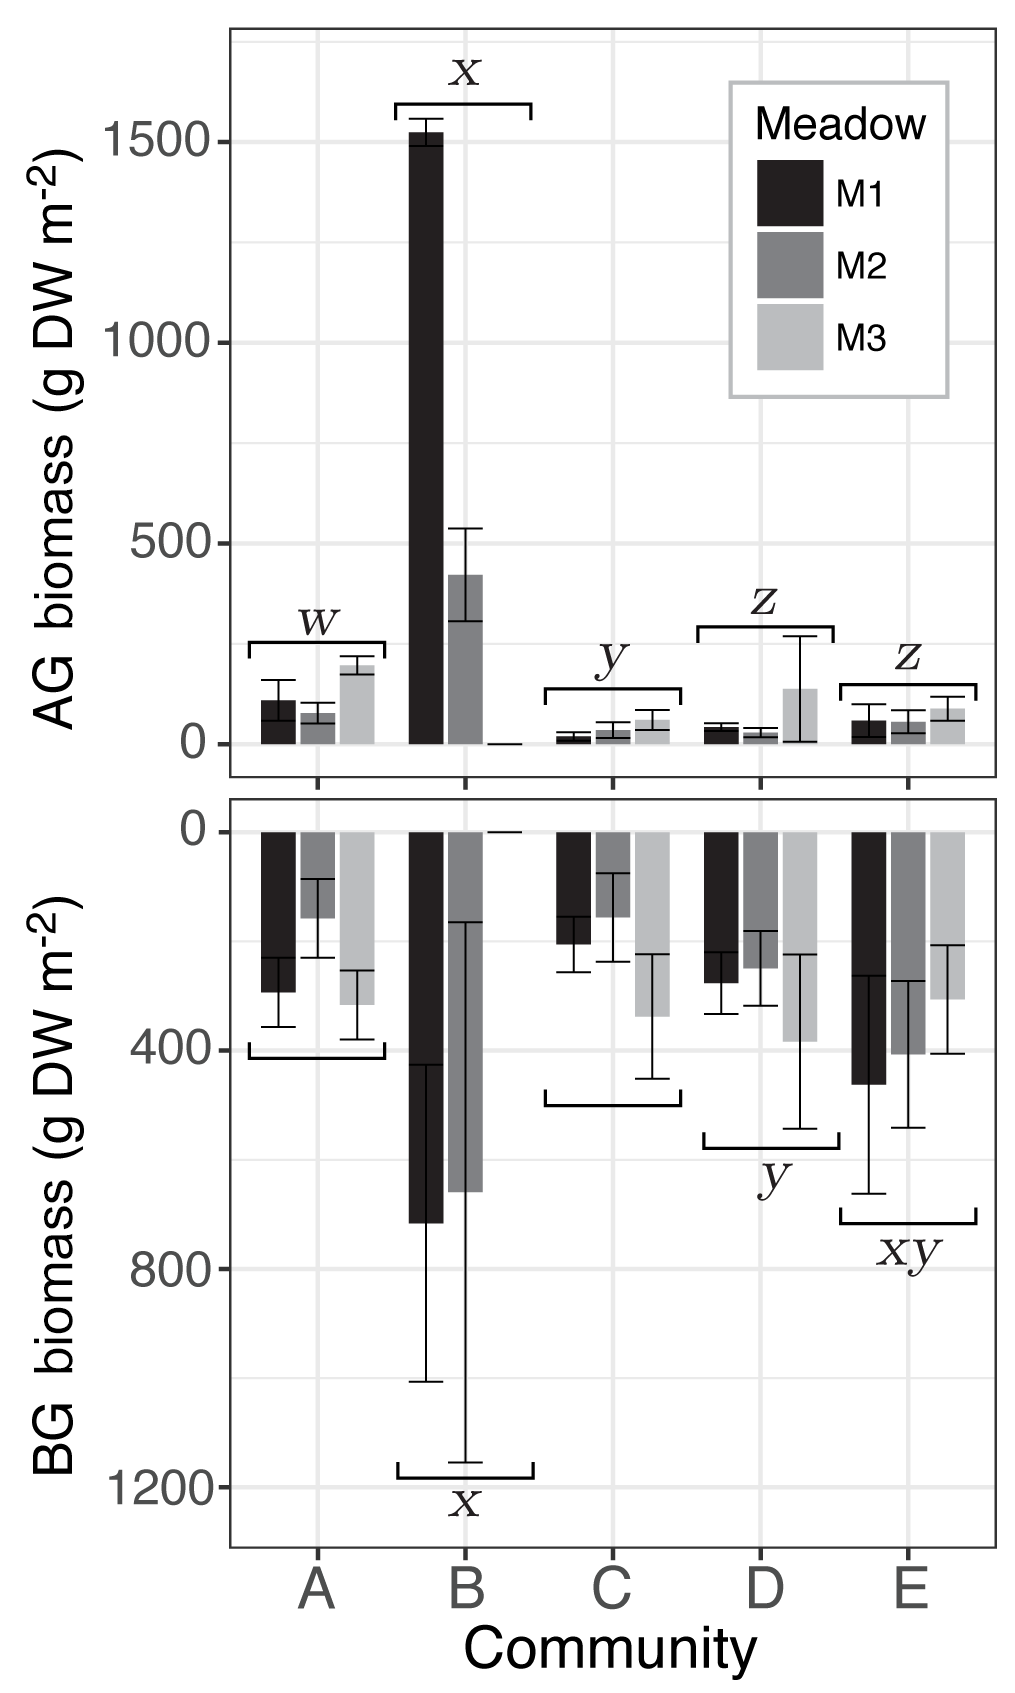 Bg Seagrass Community Level Controls Over Organic Carbon Storage Are Constrained By Geophysical Attributes Within Meadows Of Zanzibar Tanzania